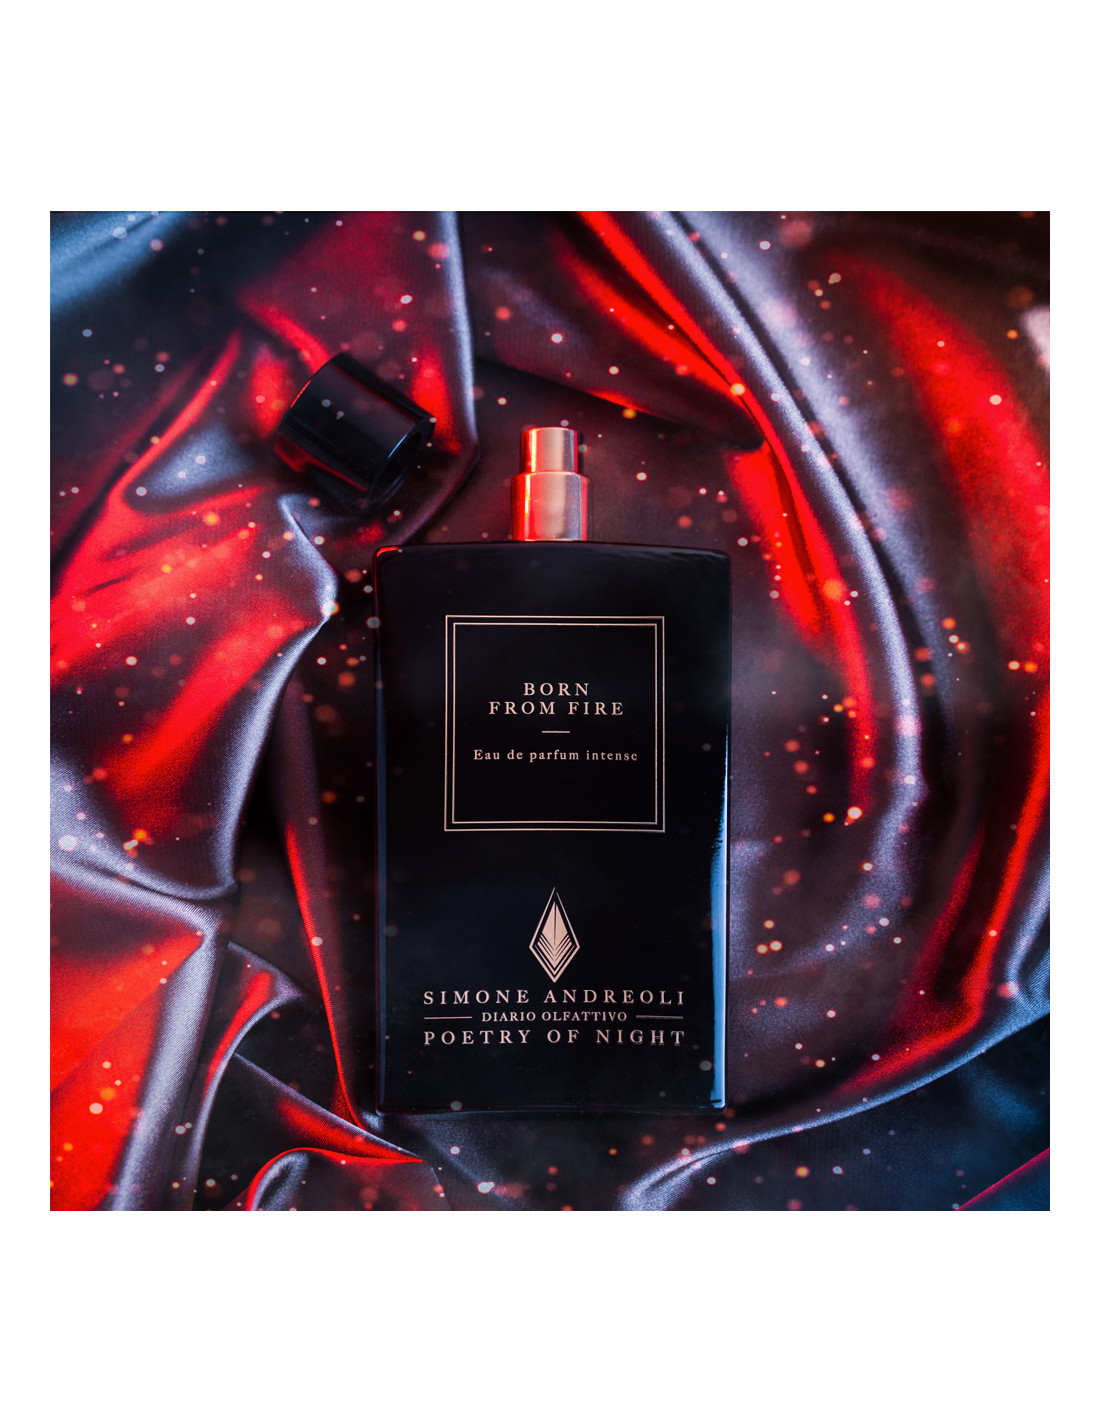 Born from Fire Eau de Parfum Intense by Simone Andreoli, Luckyscent